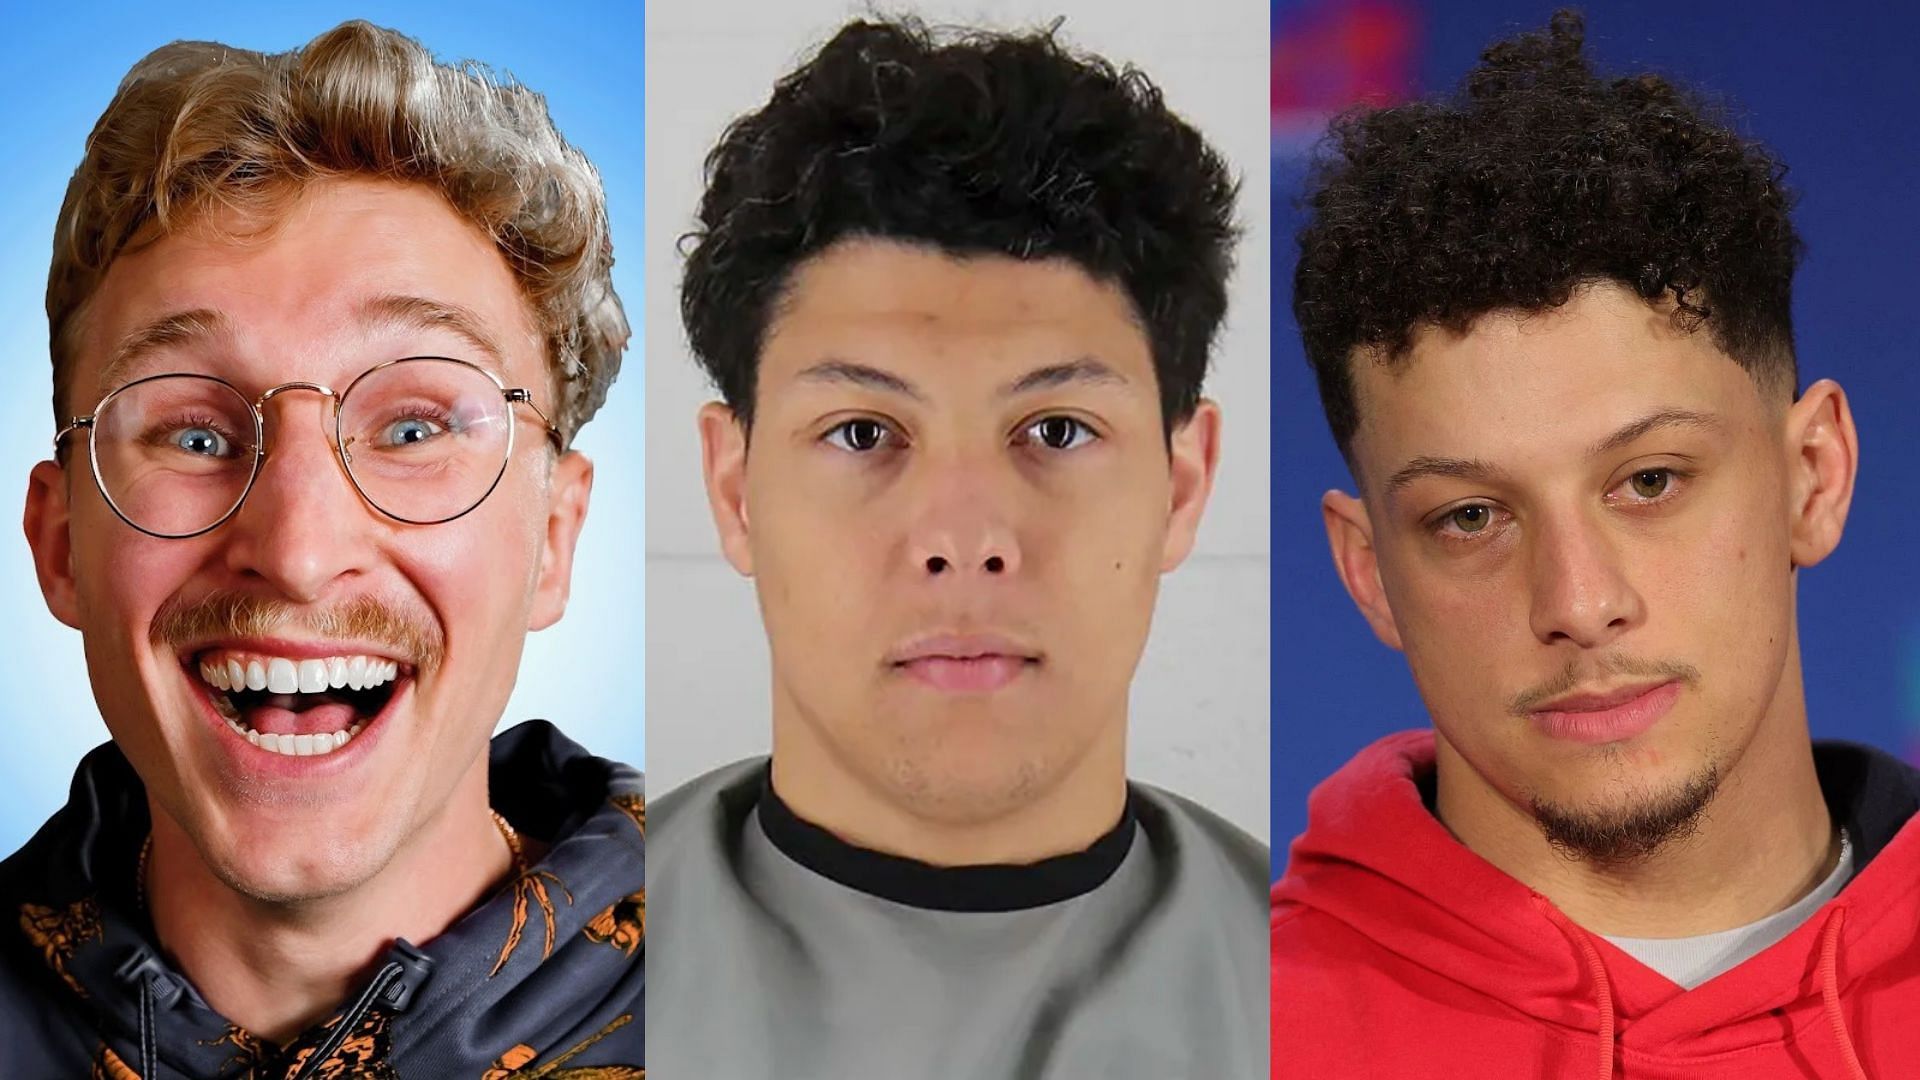 YouTuber MMG took a comical dig on Patrick Mahomes